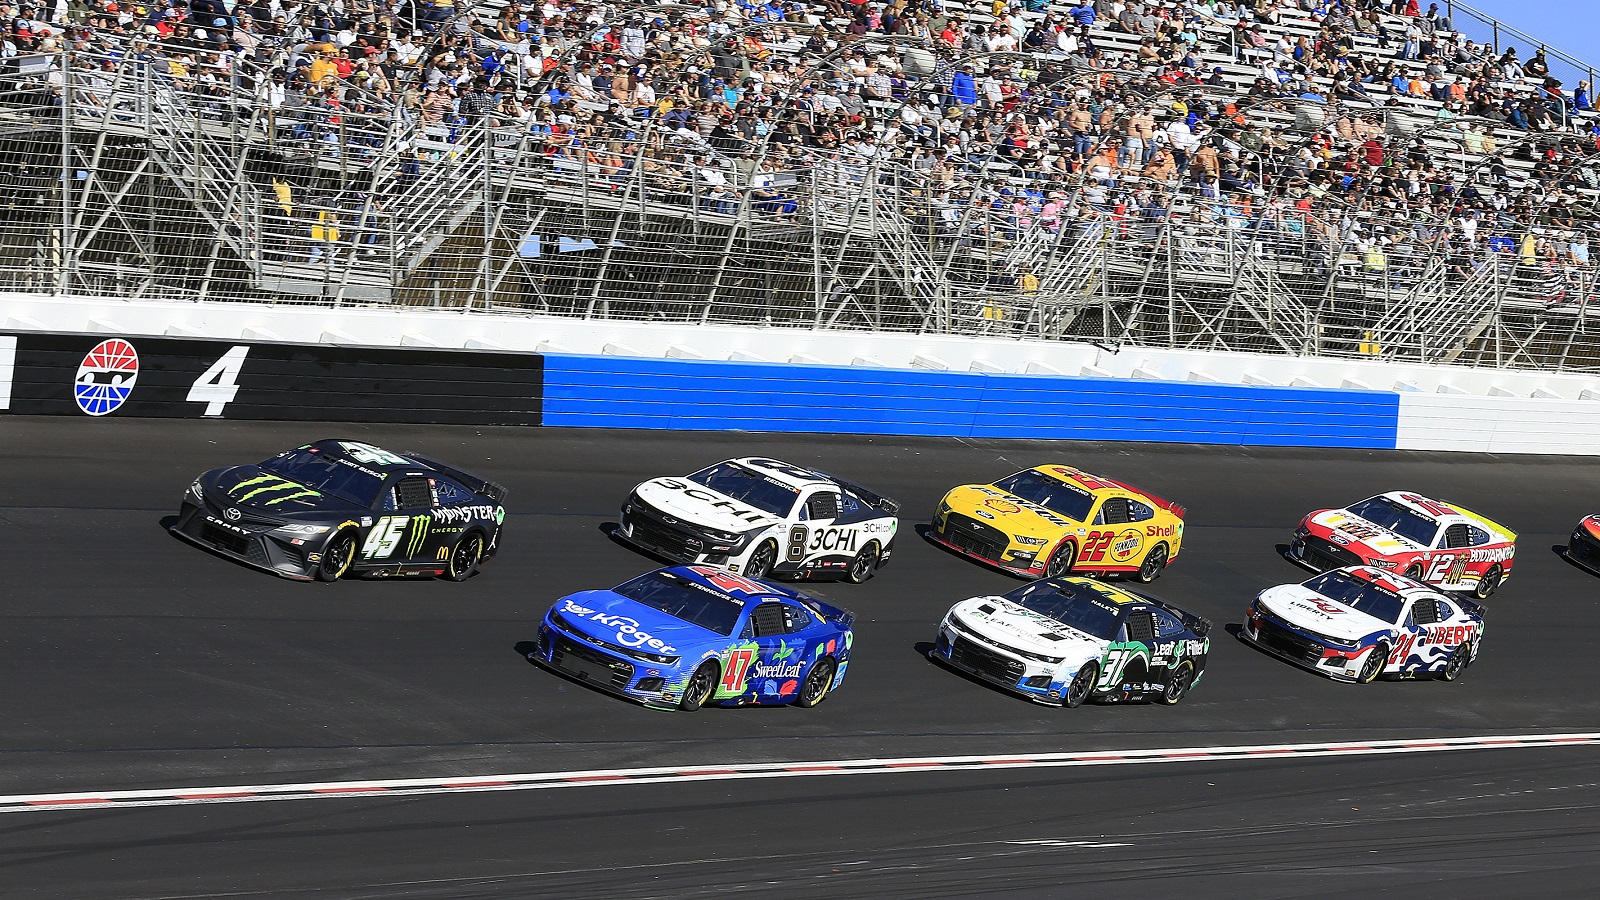 General race action in Turn 4 during the Folds of Honor QuikTrip 500 NASCAR Cup Series race on March 20, 2022 at Atlanta Motor Speedway.